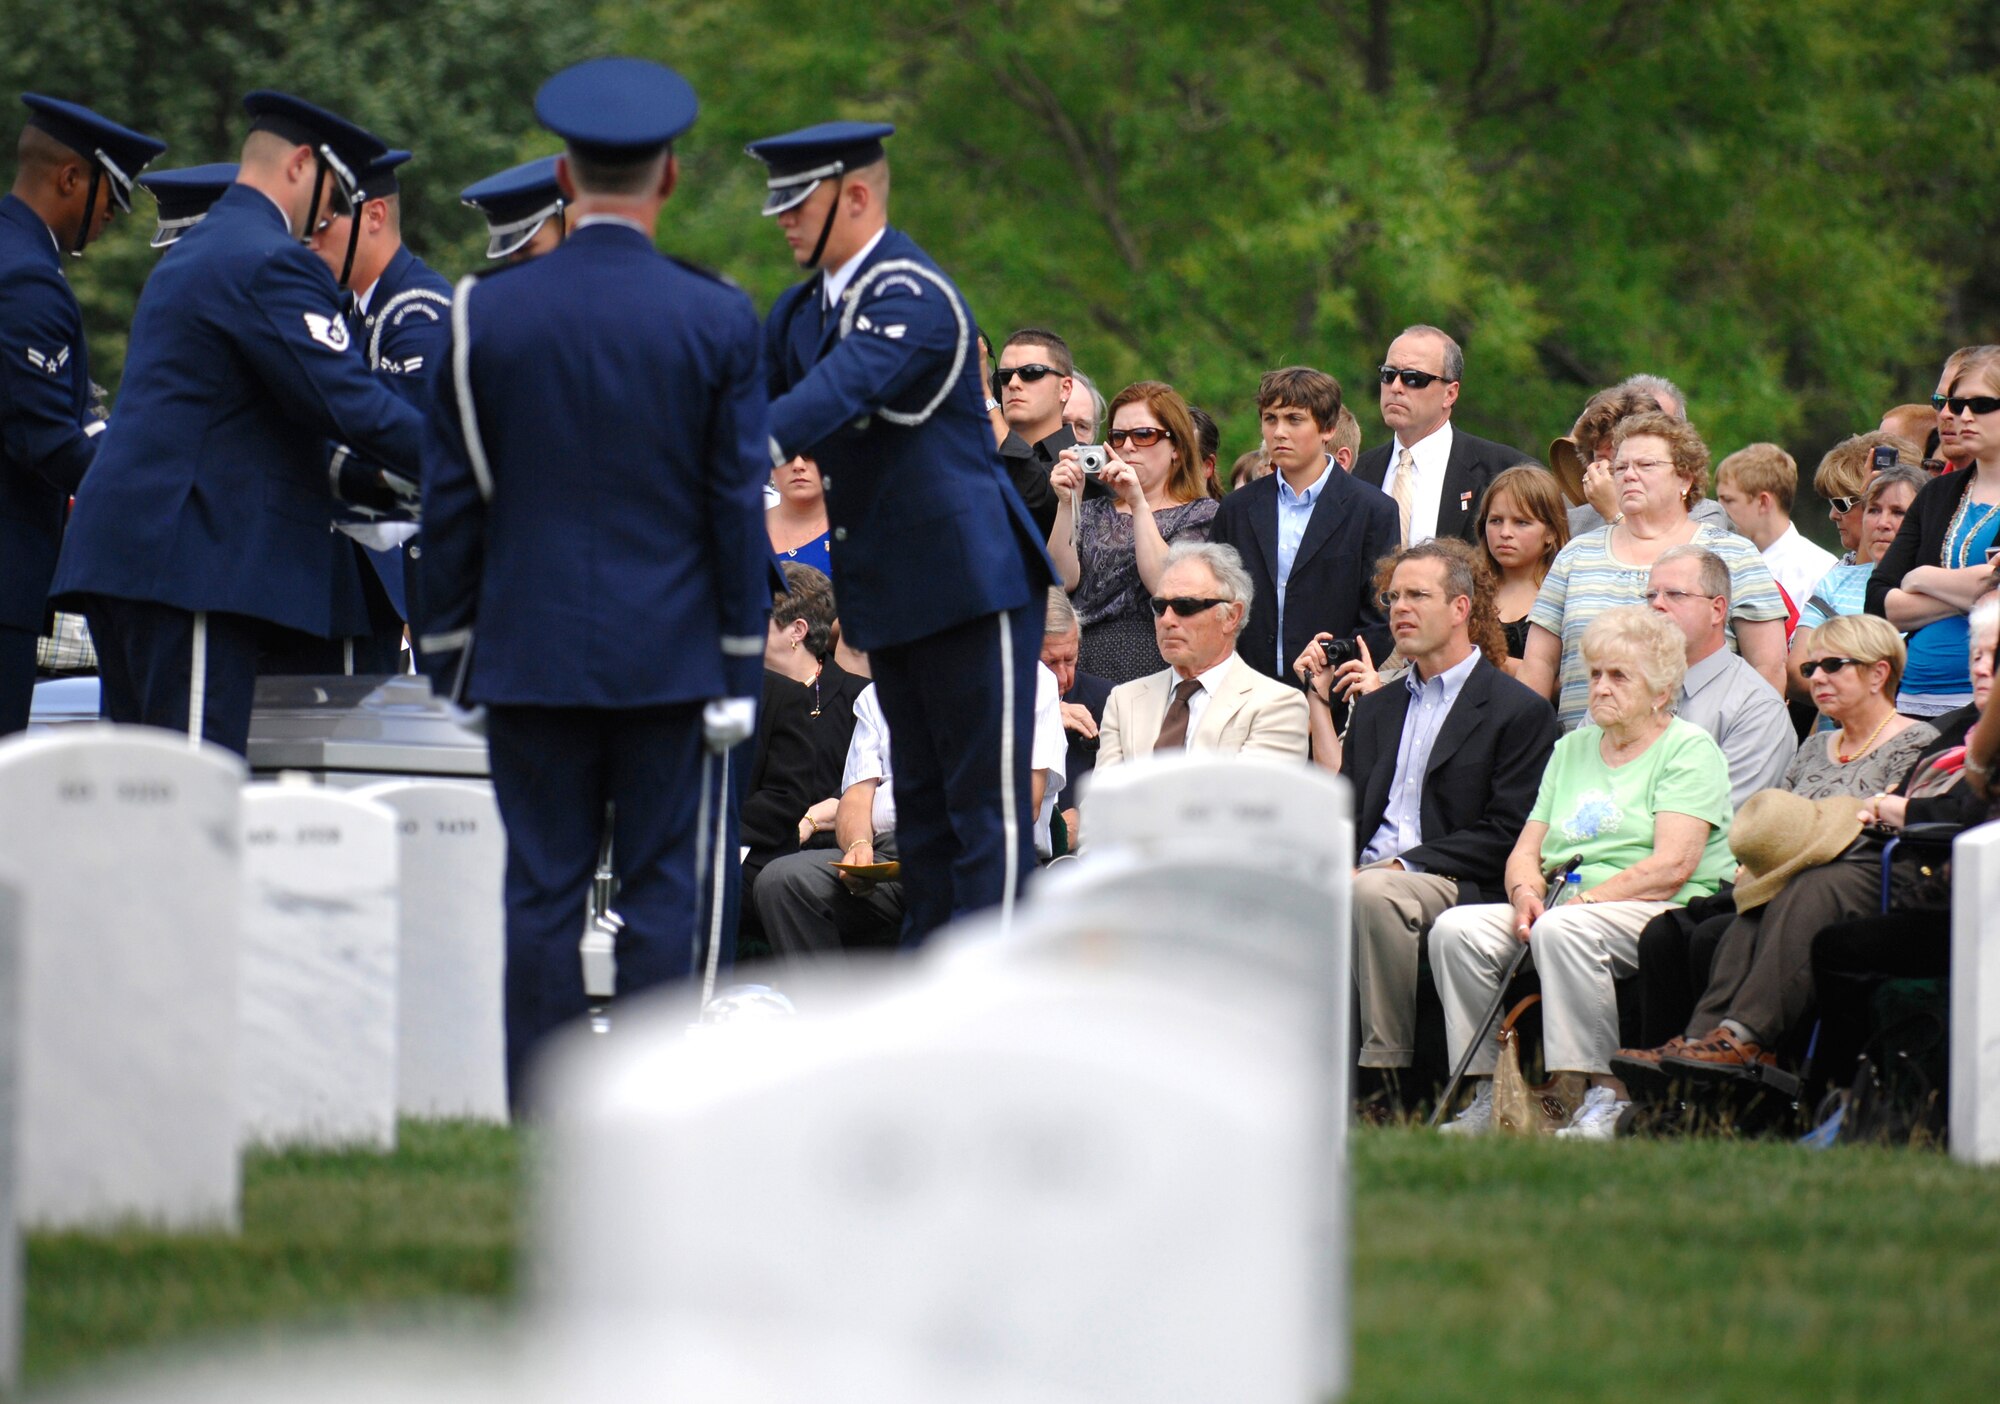 Families observe as an Air Force honor guard folds the flag that draped a casket containing unidentified remains during a burial service at Arlington National Cemetery, June 17, 2010. The ceremony honored 14 airmen who were killed in March 1972 when their aircraft was shot down over southern Laos. (DoD photo/Army Sgt. 1st Class Michael J. Carden)